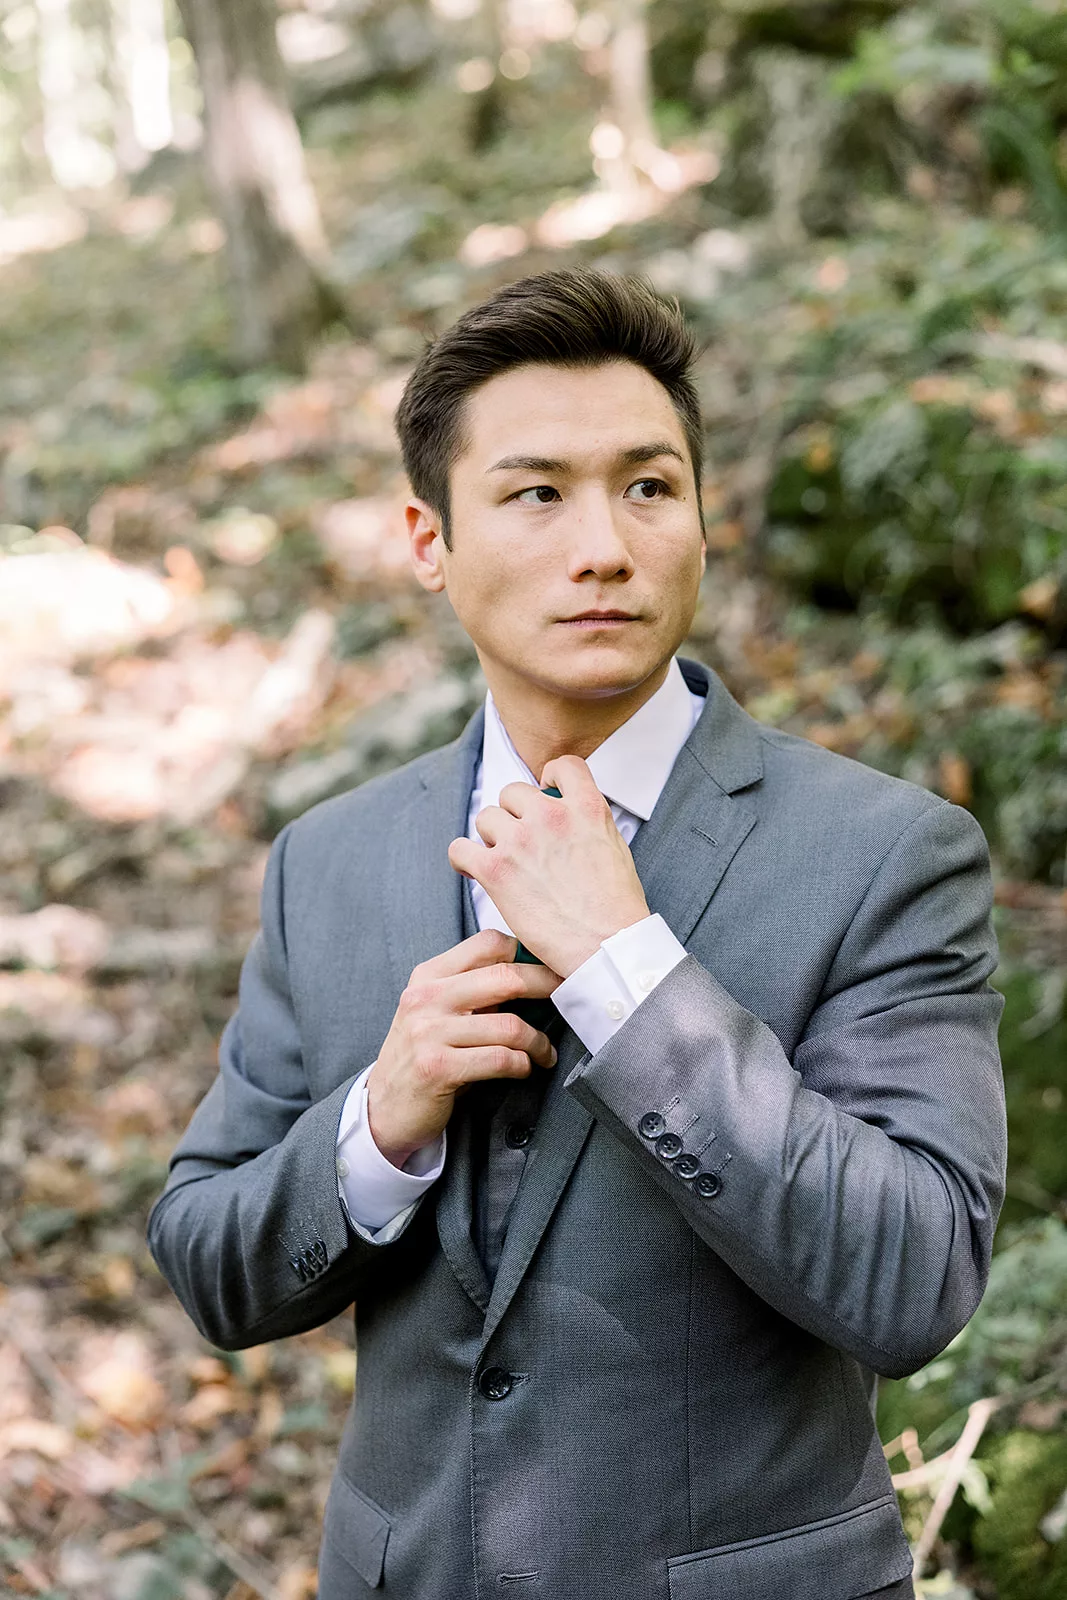 A groom adjusts his tie while standing in a forest in a grey suit